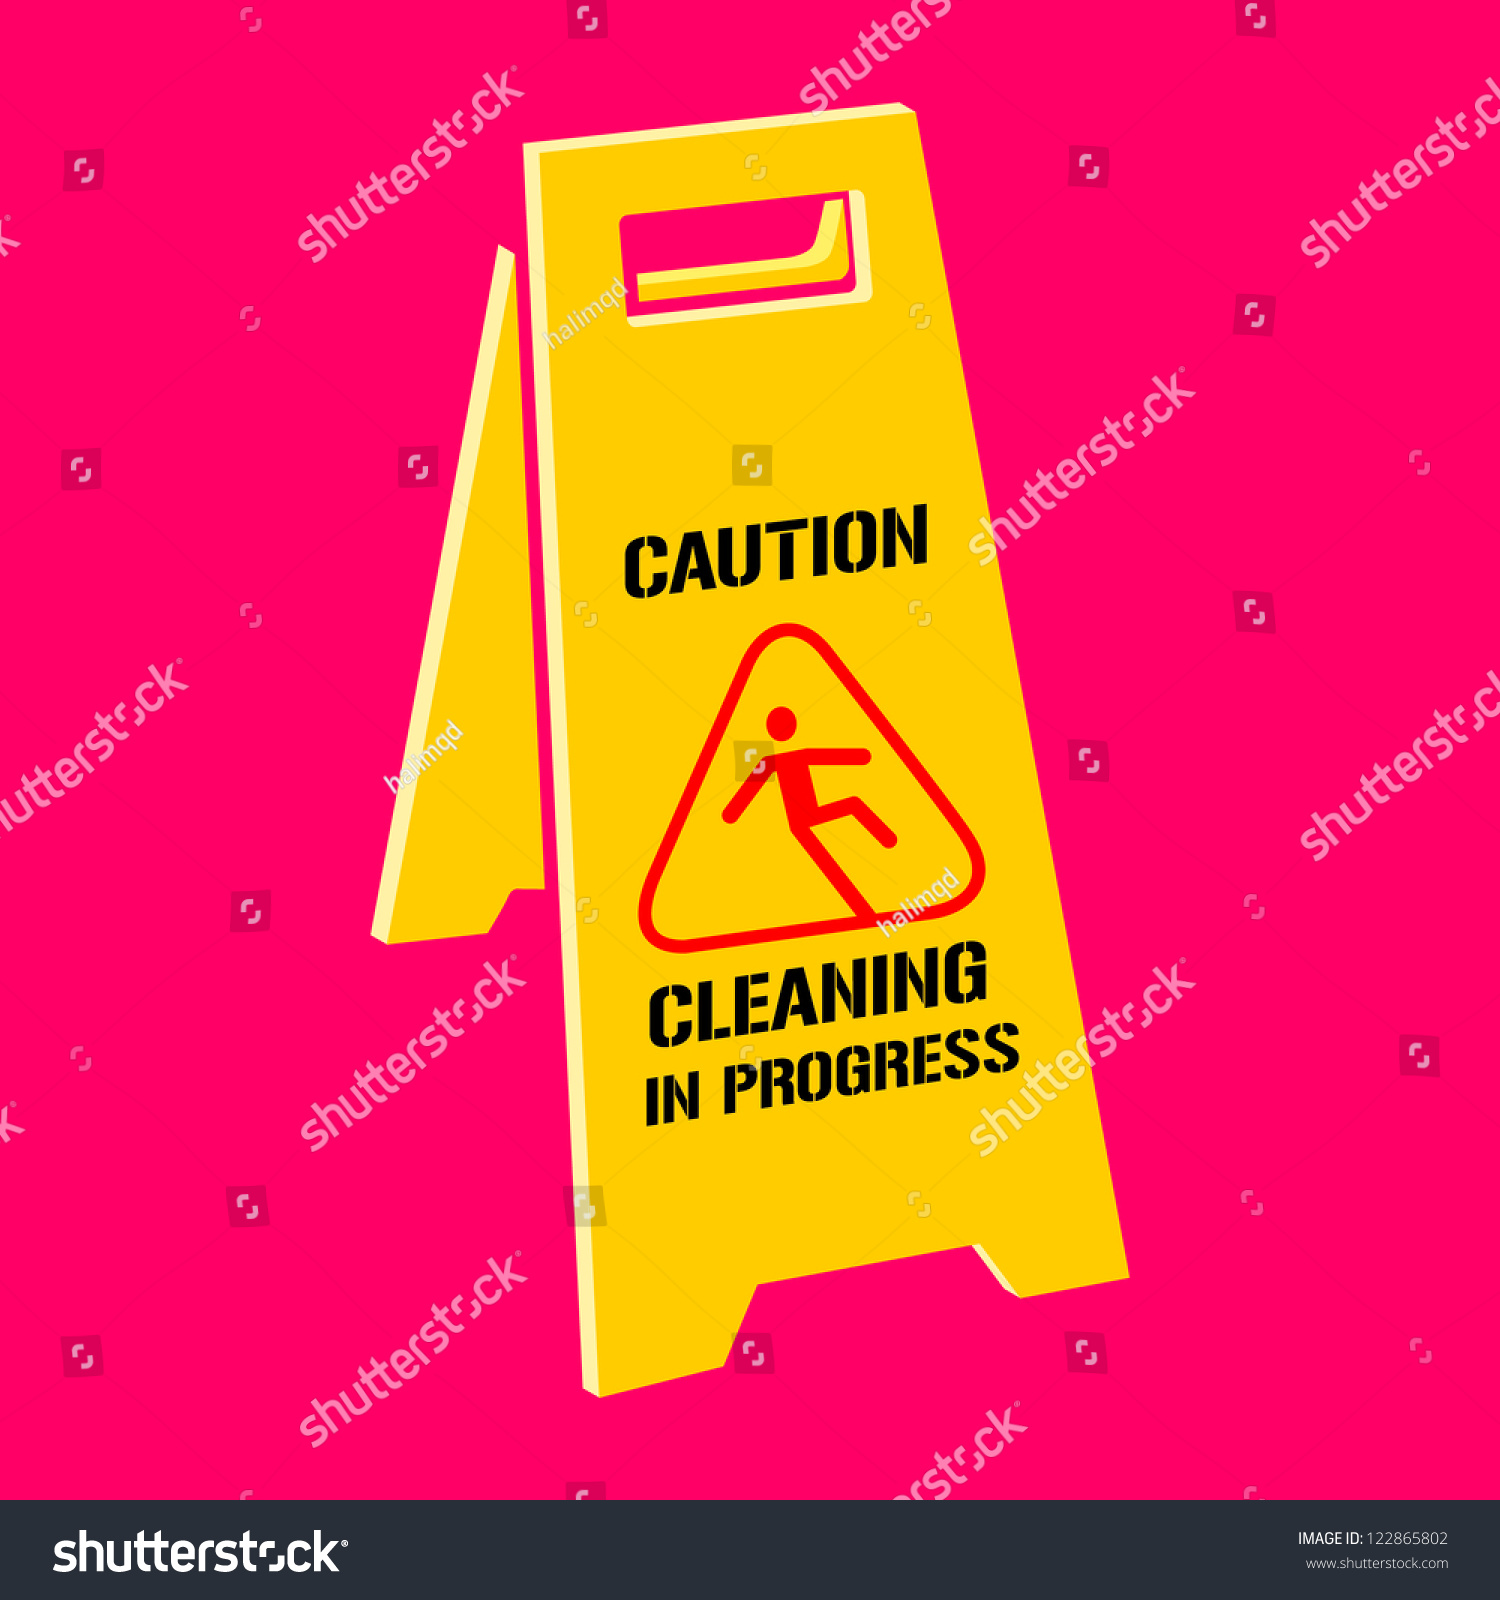 danger-sign-caution-cleaning-in-progress-stock-vector-illustration